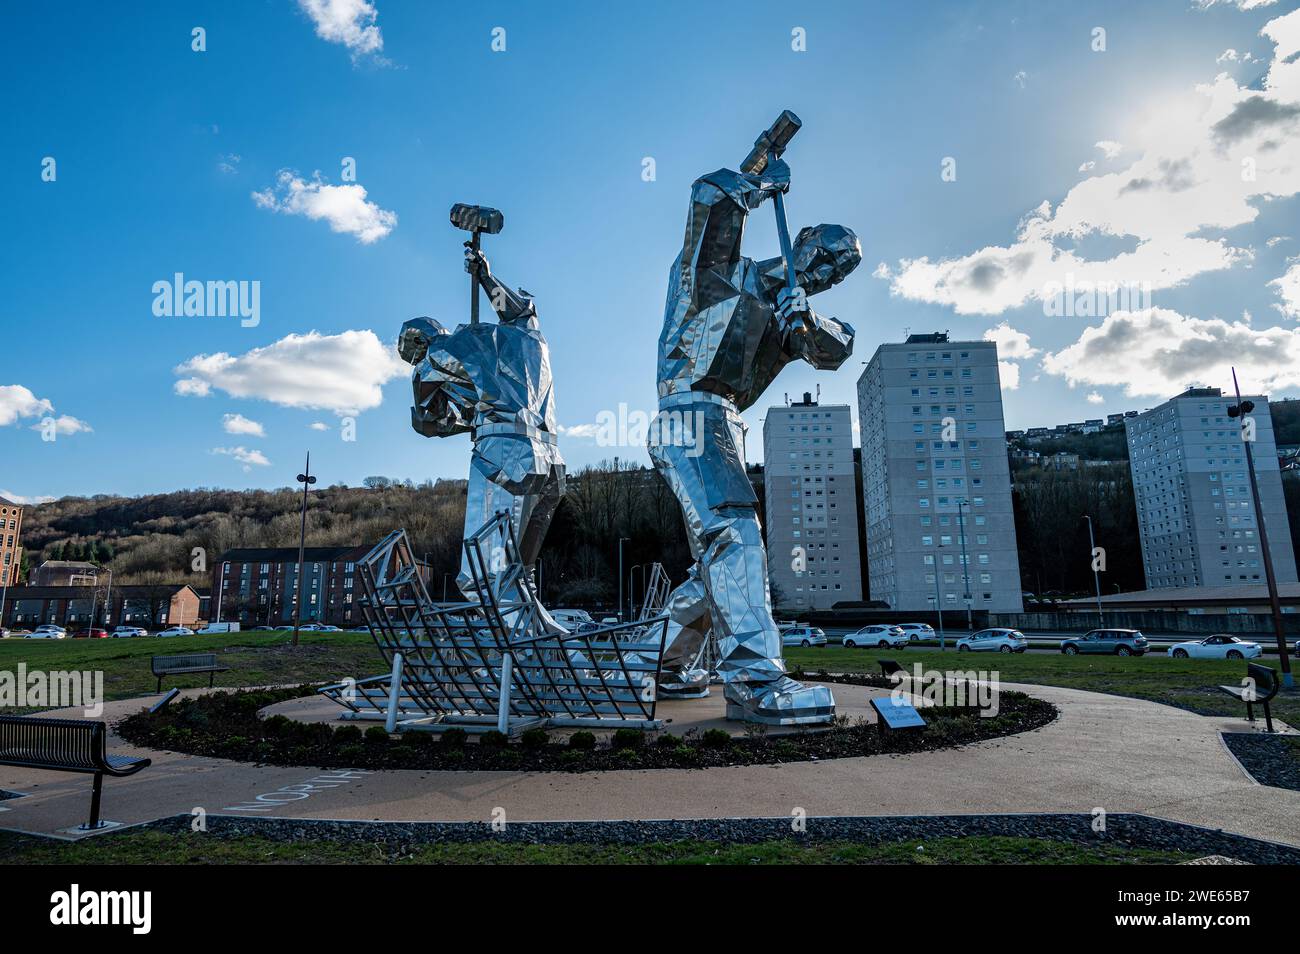 Large Shipbuilding heritage sculpture at roundabout in Port Glasgow Scotland. Stock Photo